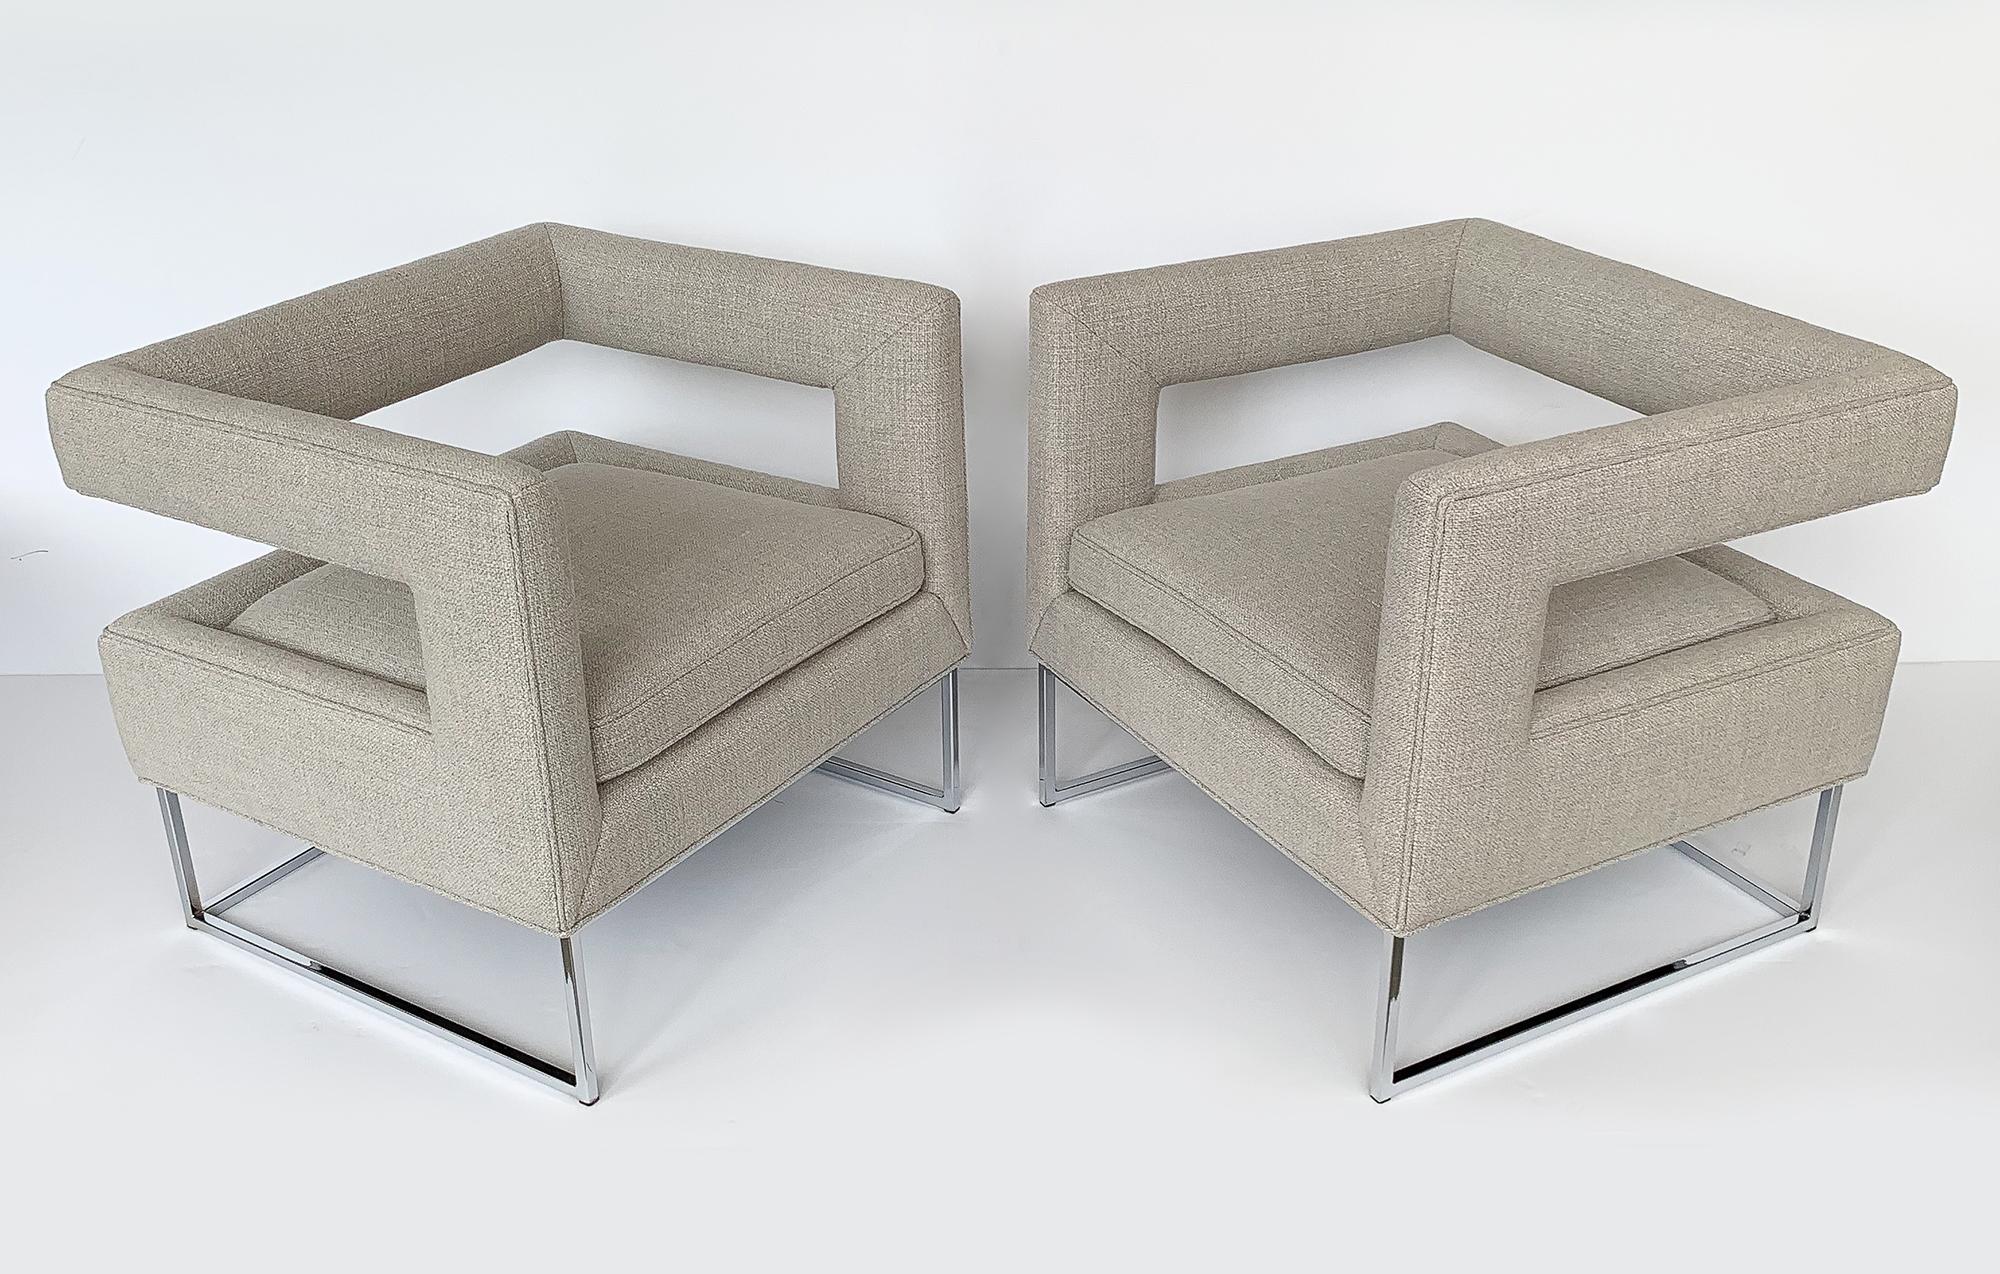 Striking pair of Milo Baughman open back lounge chairs, circa 1970s. These cube shaped chairs are newly upholstered in a sophisticated pale gray-beige textured woven fabric. All new foam throughout. Loose seat cushion. Chrome-plated square tubular